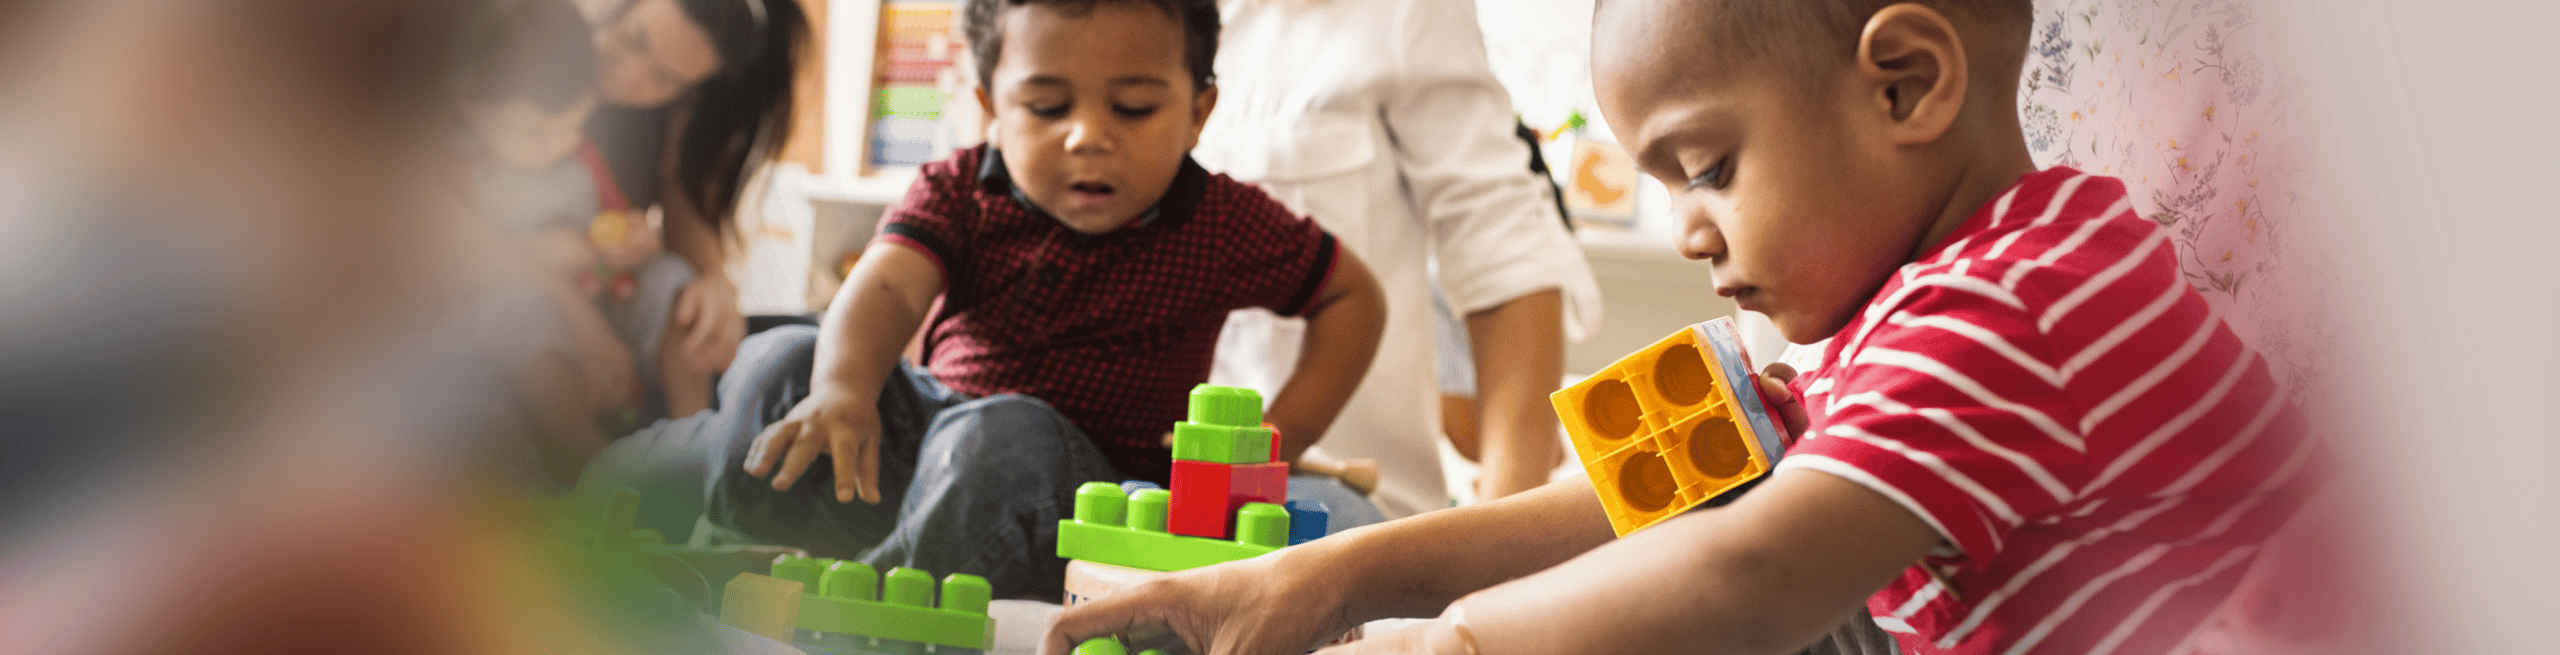 wide banner of children playing together with building blocks